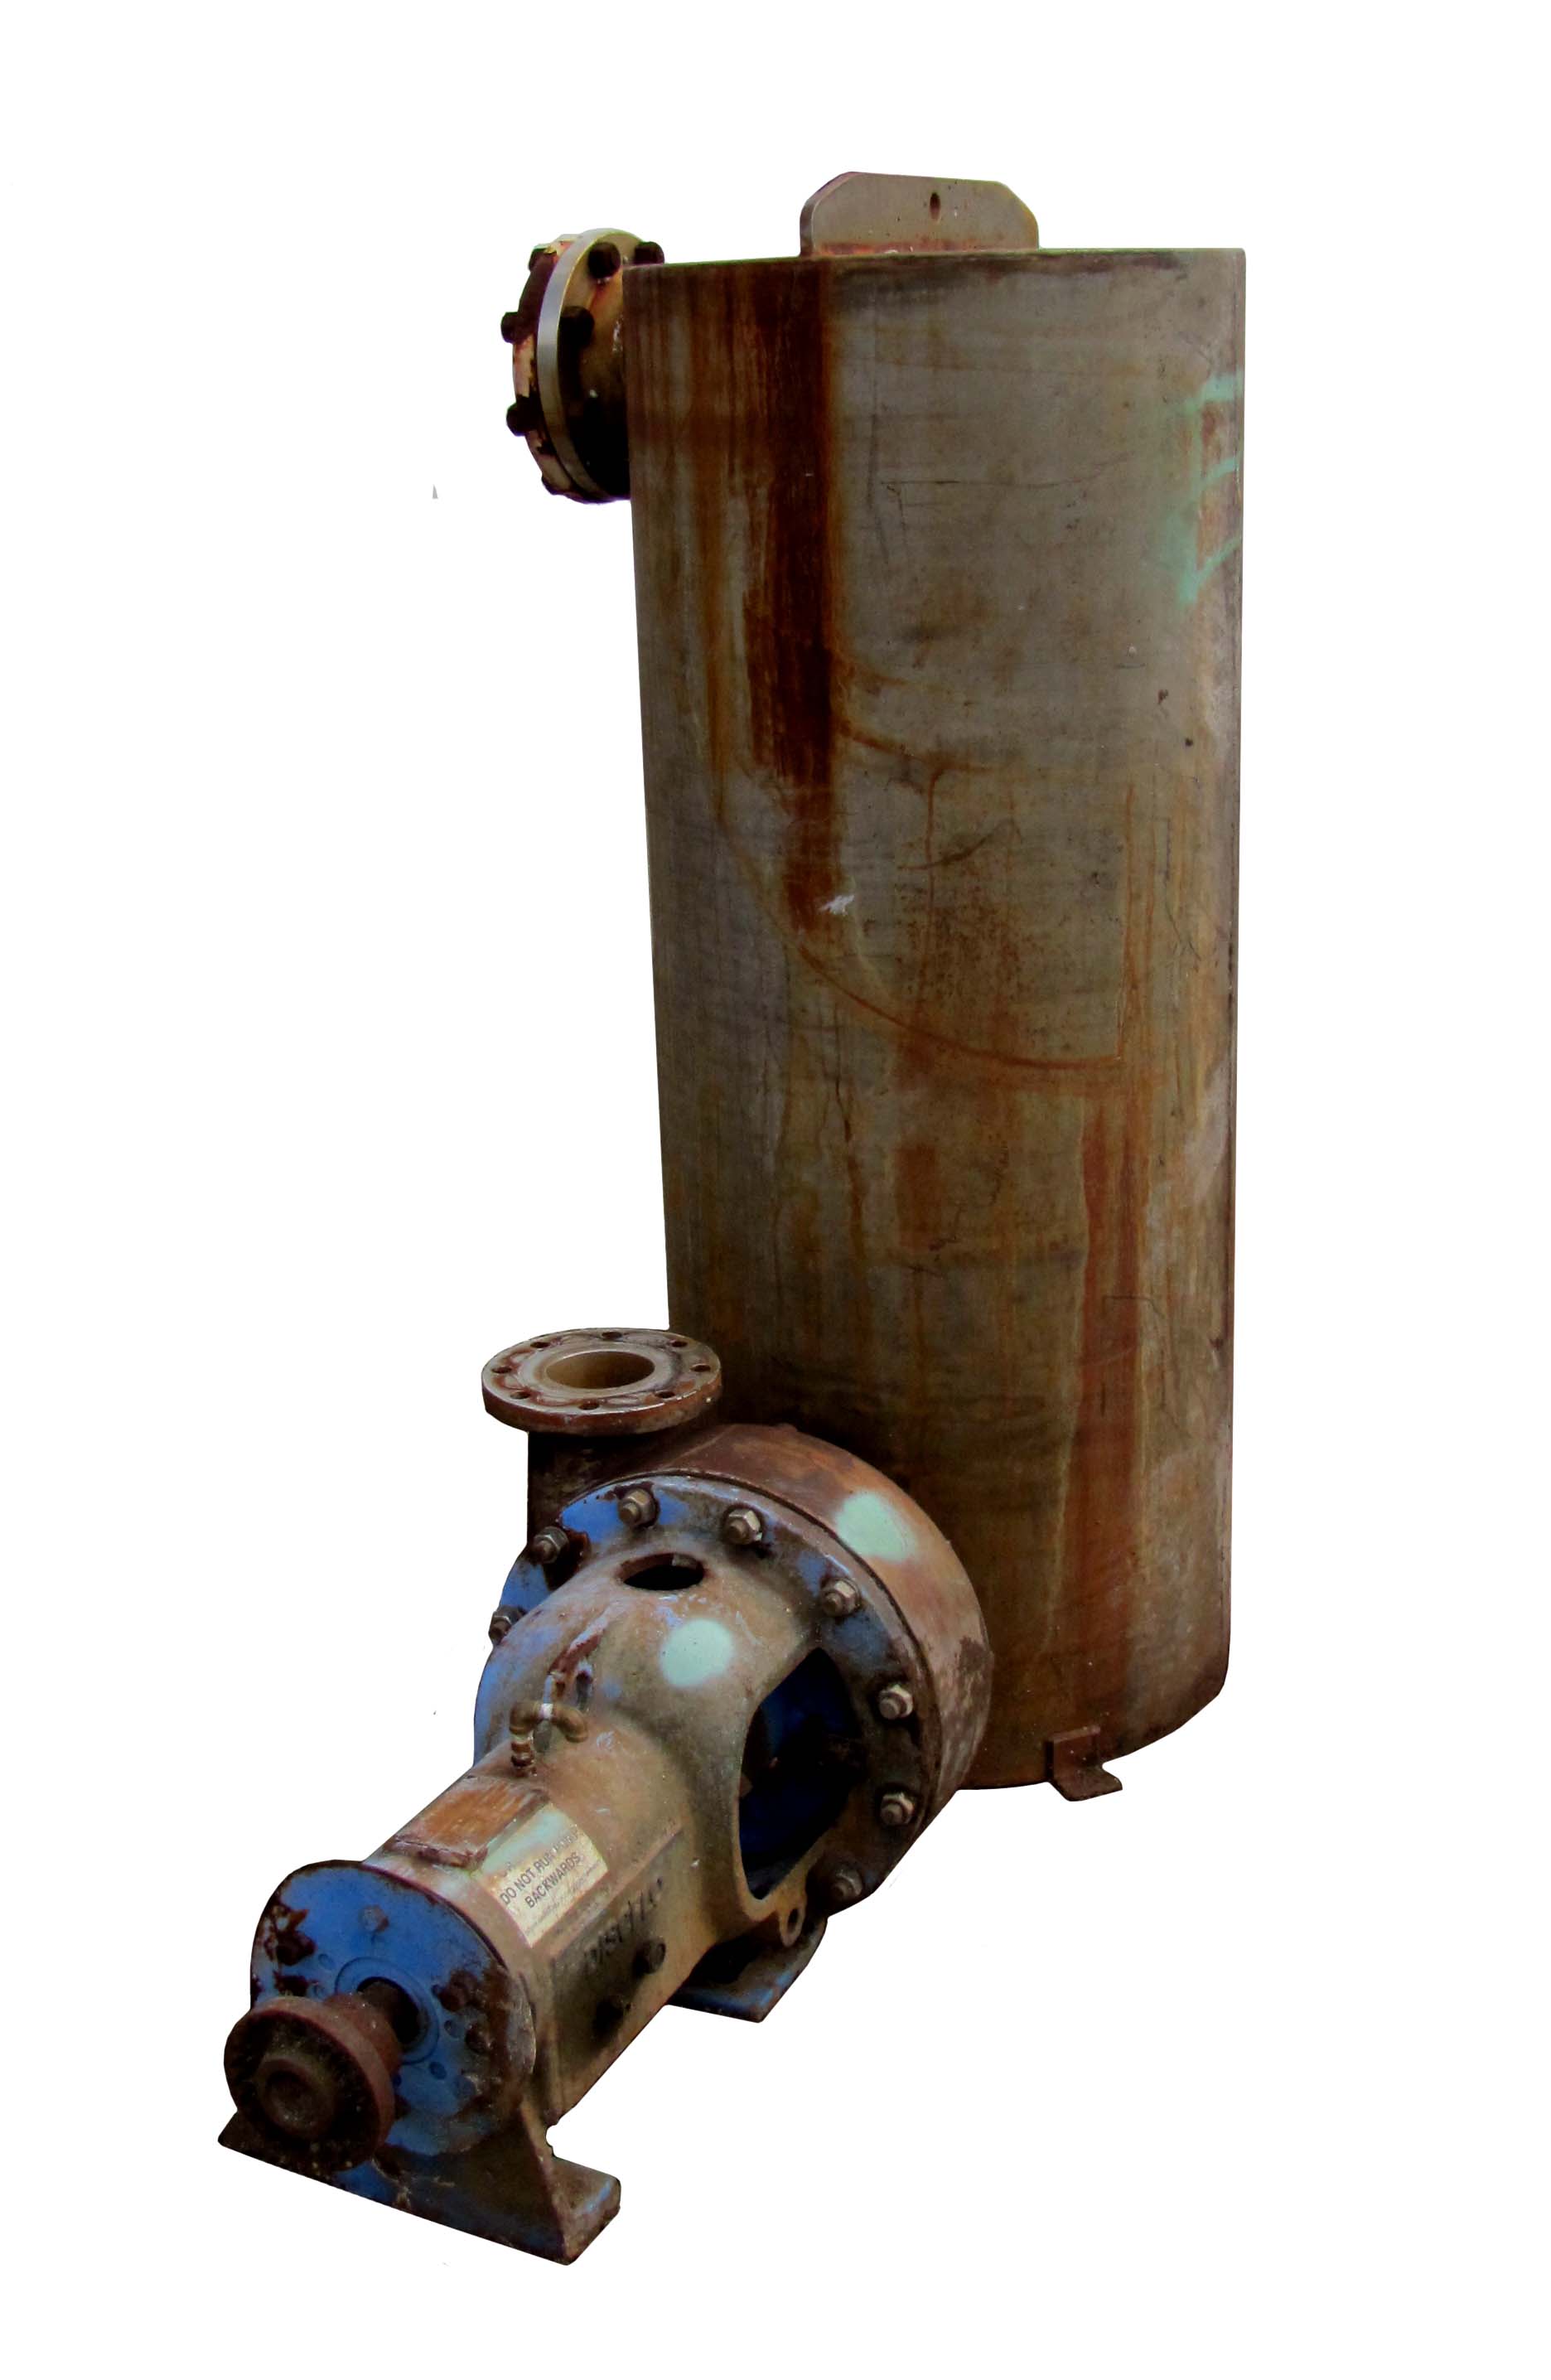 Discflo Corp. Stainless Steel pump with suction pot (2' dia x 5' T/T).  Pump is 6x4 rated 50 GPM.